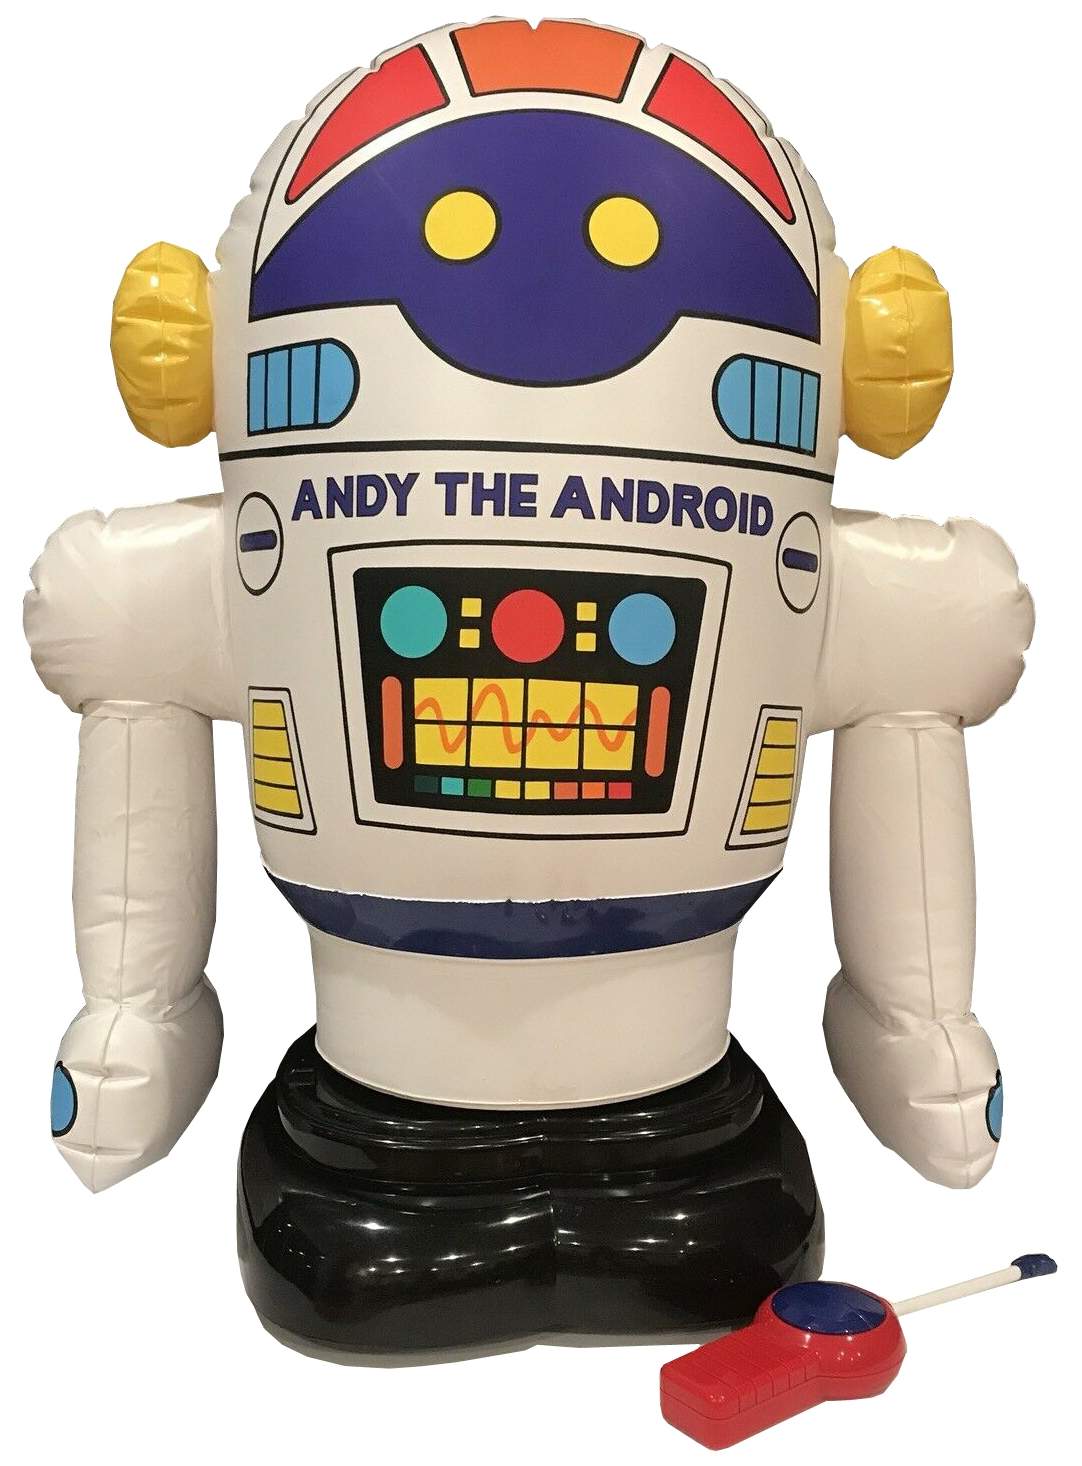 Andy the Android Radio Shack - The Robots Site